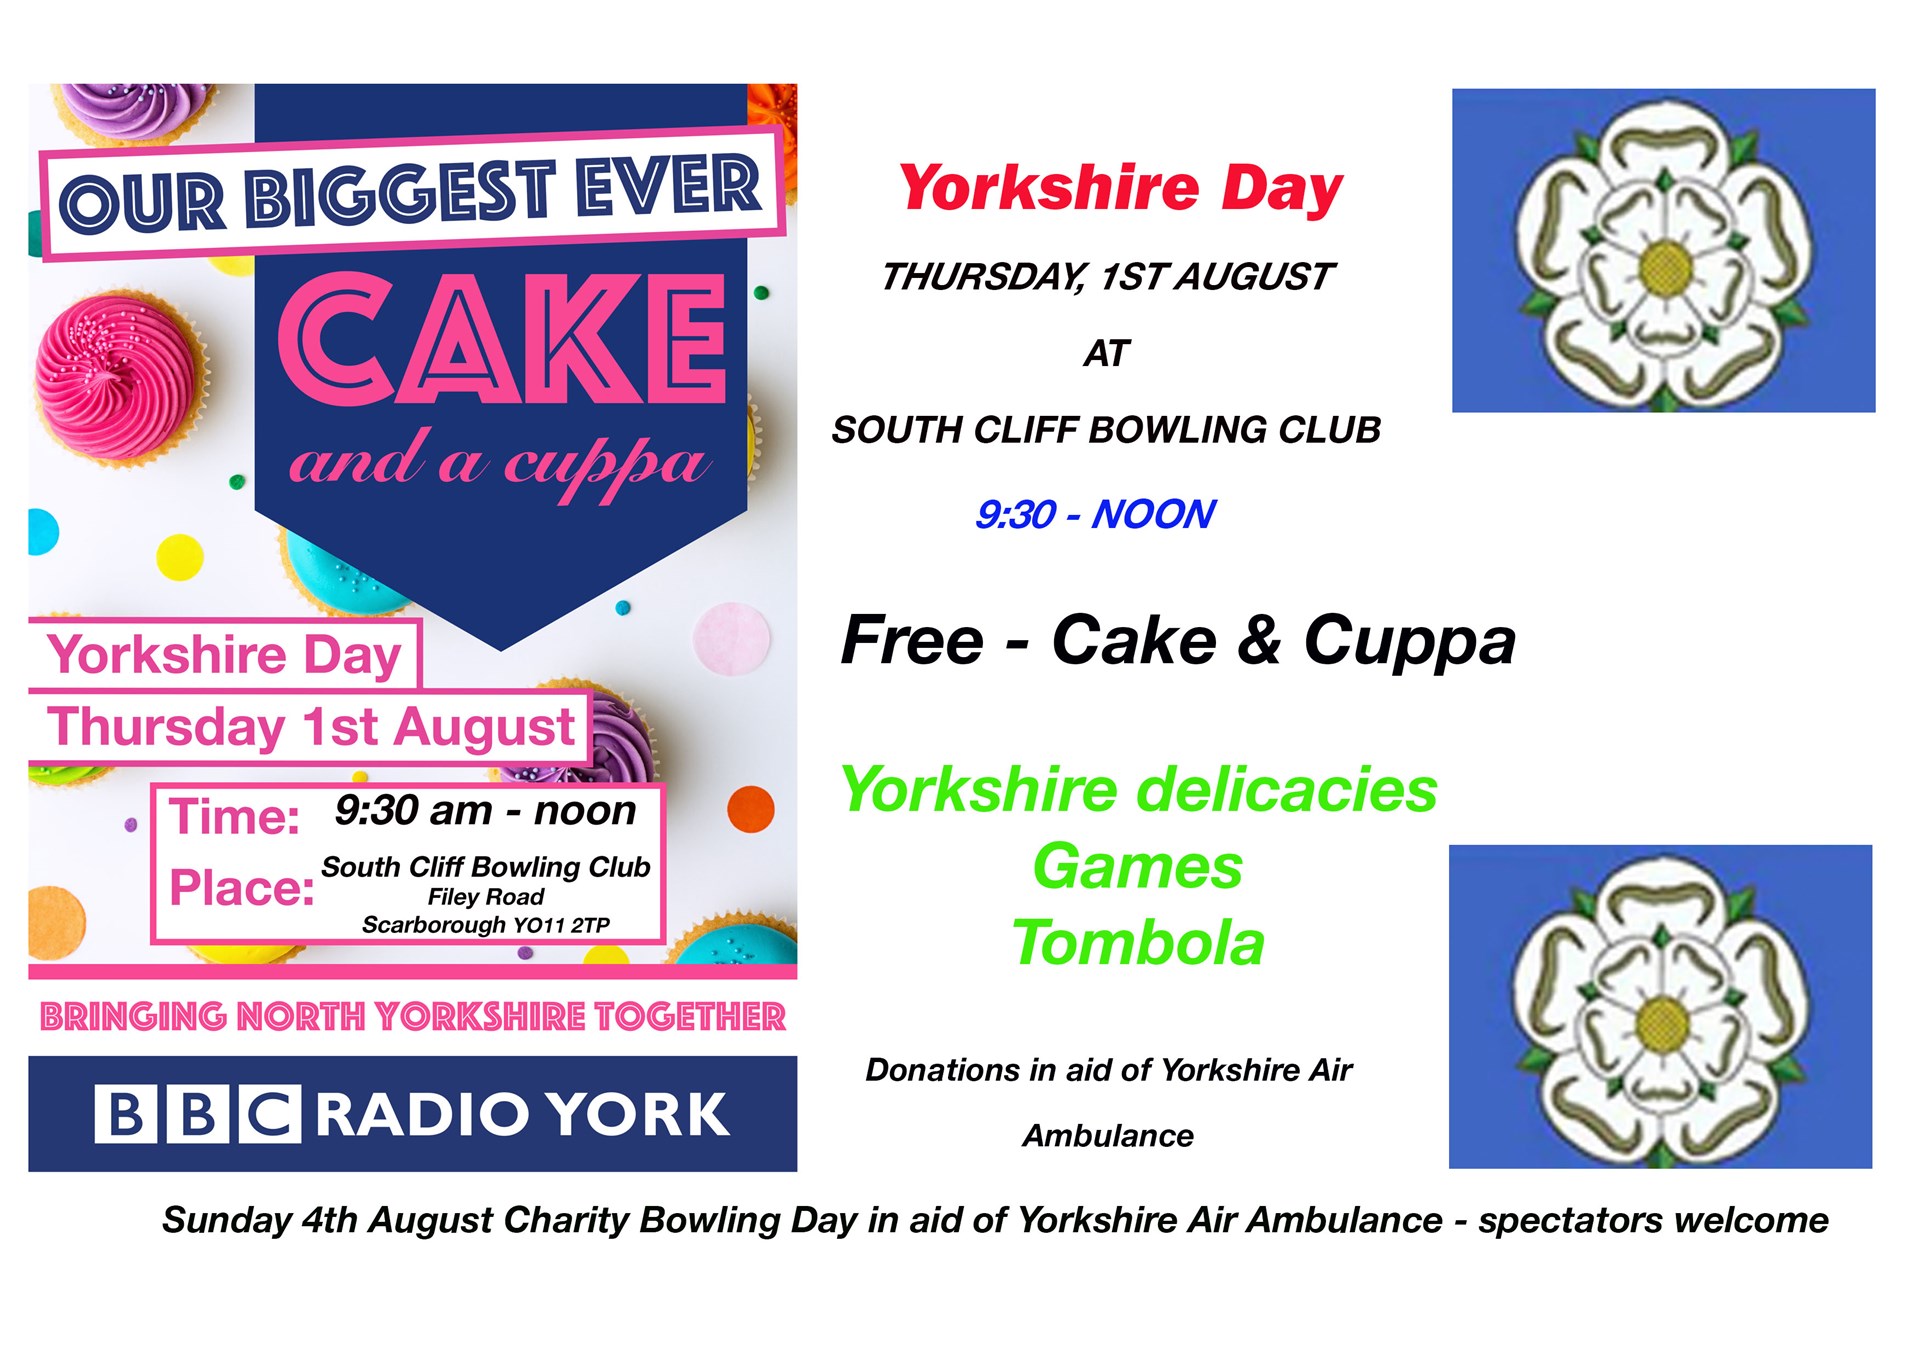 Yorkshire Day Cake & a Cuppa